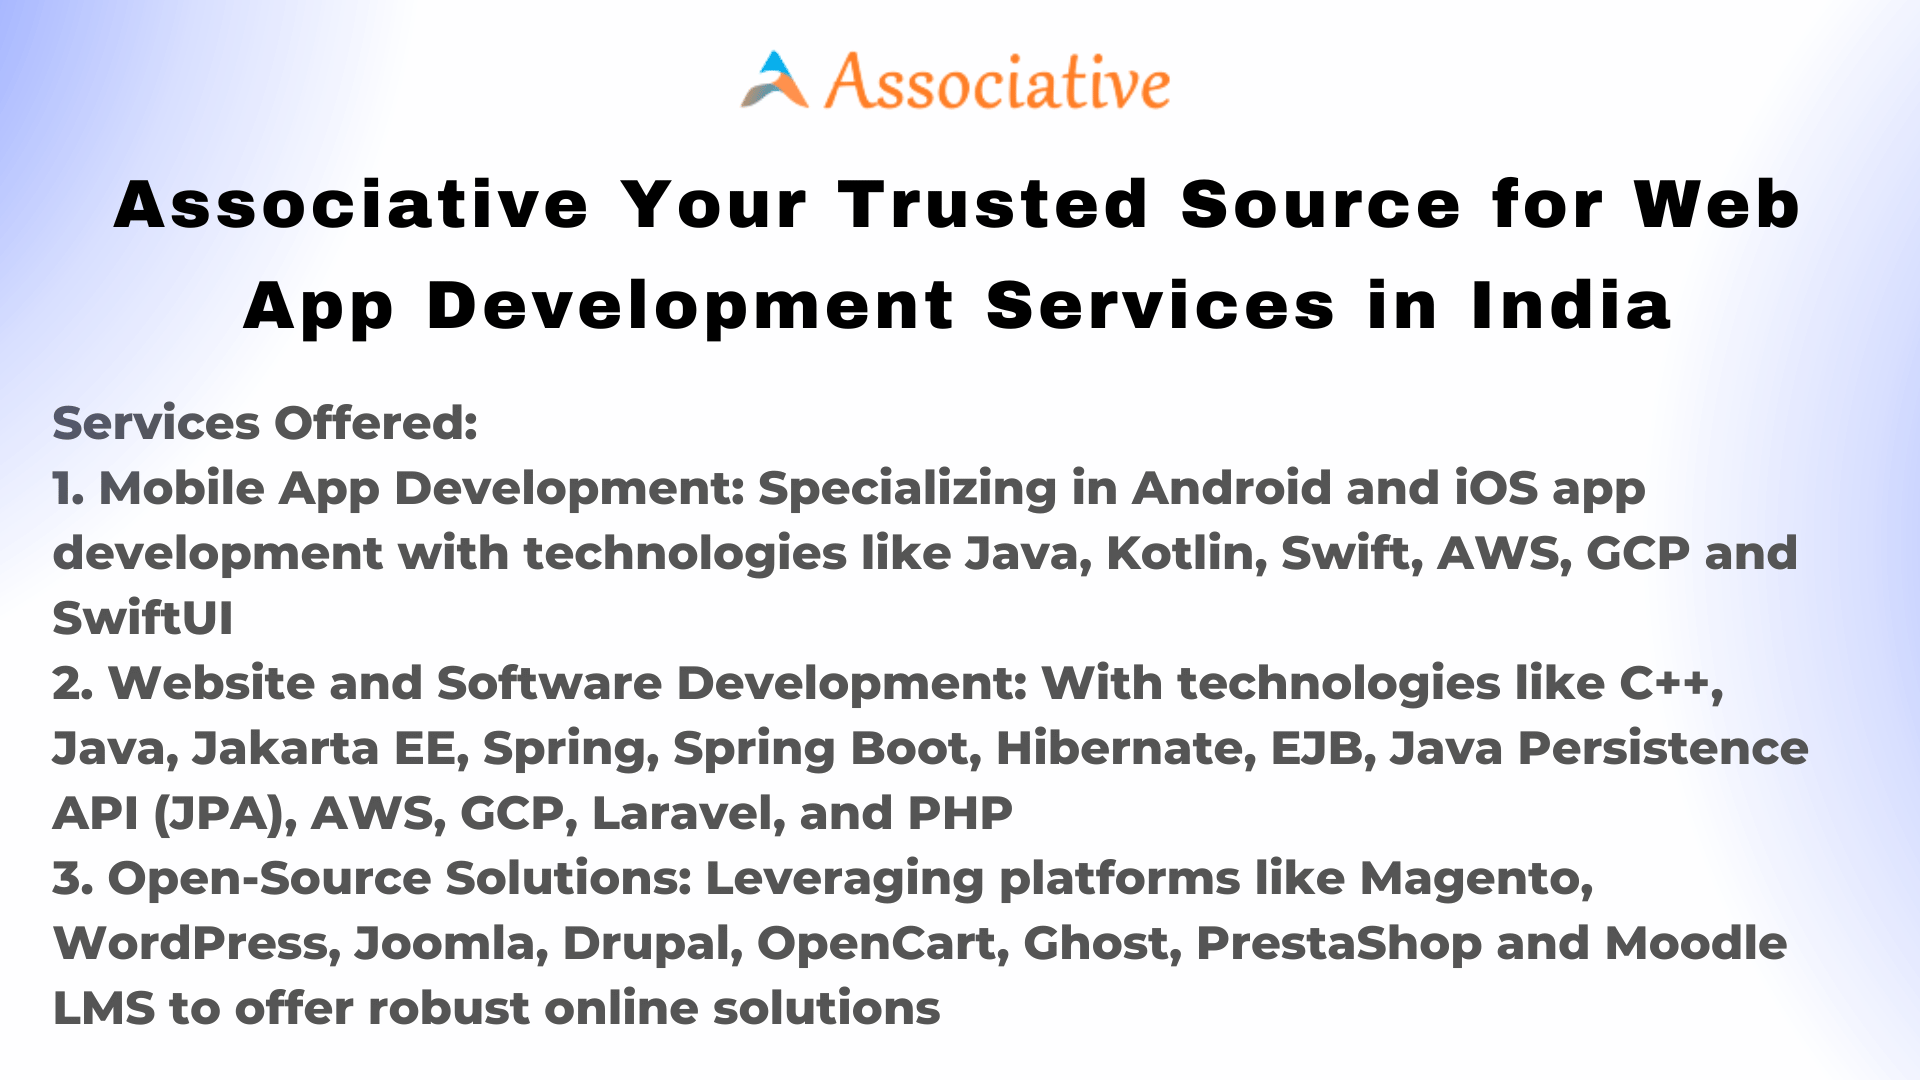 Associative Your Trusted Source for Web App Development Services in India